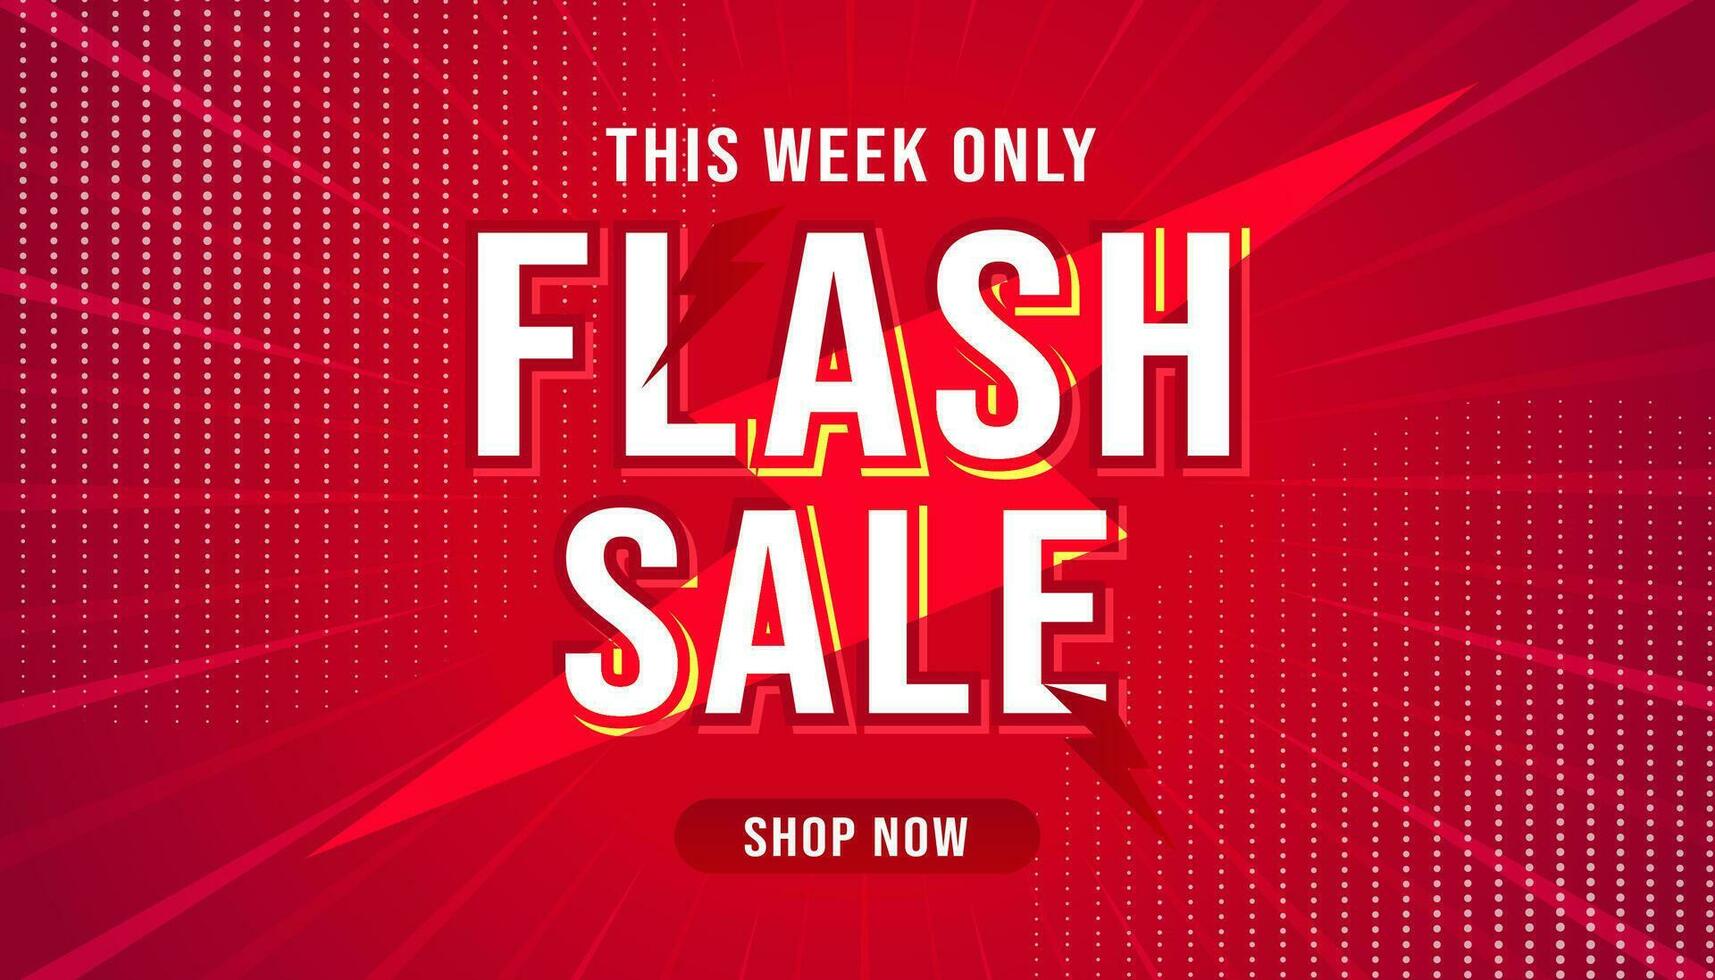 Flash Sale Shopping Poster or Banner with Flash icon on Red background. Flash Sales banner template design for social media and website vector